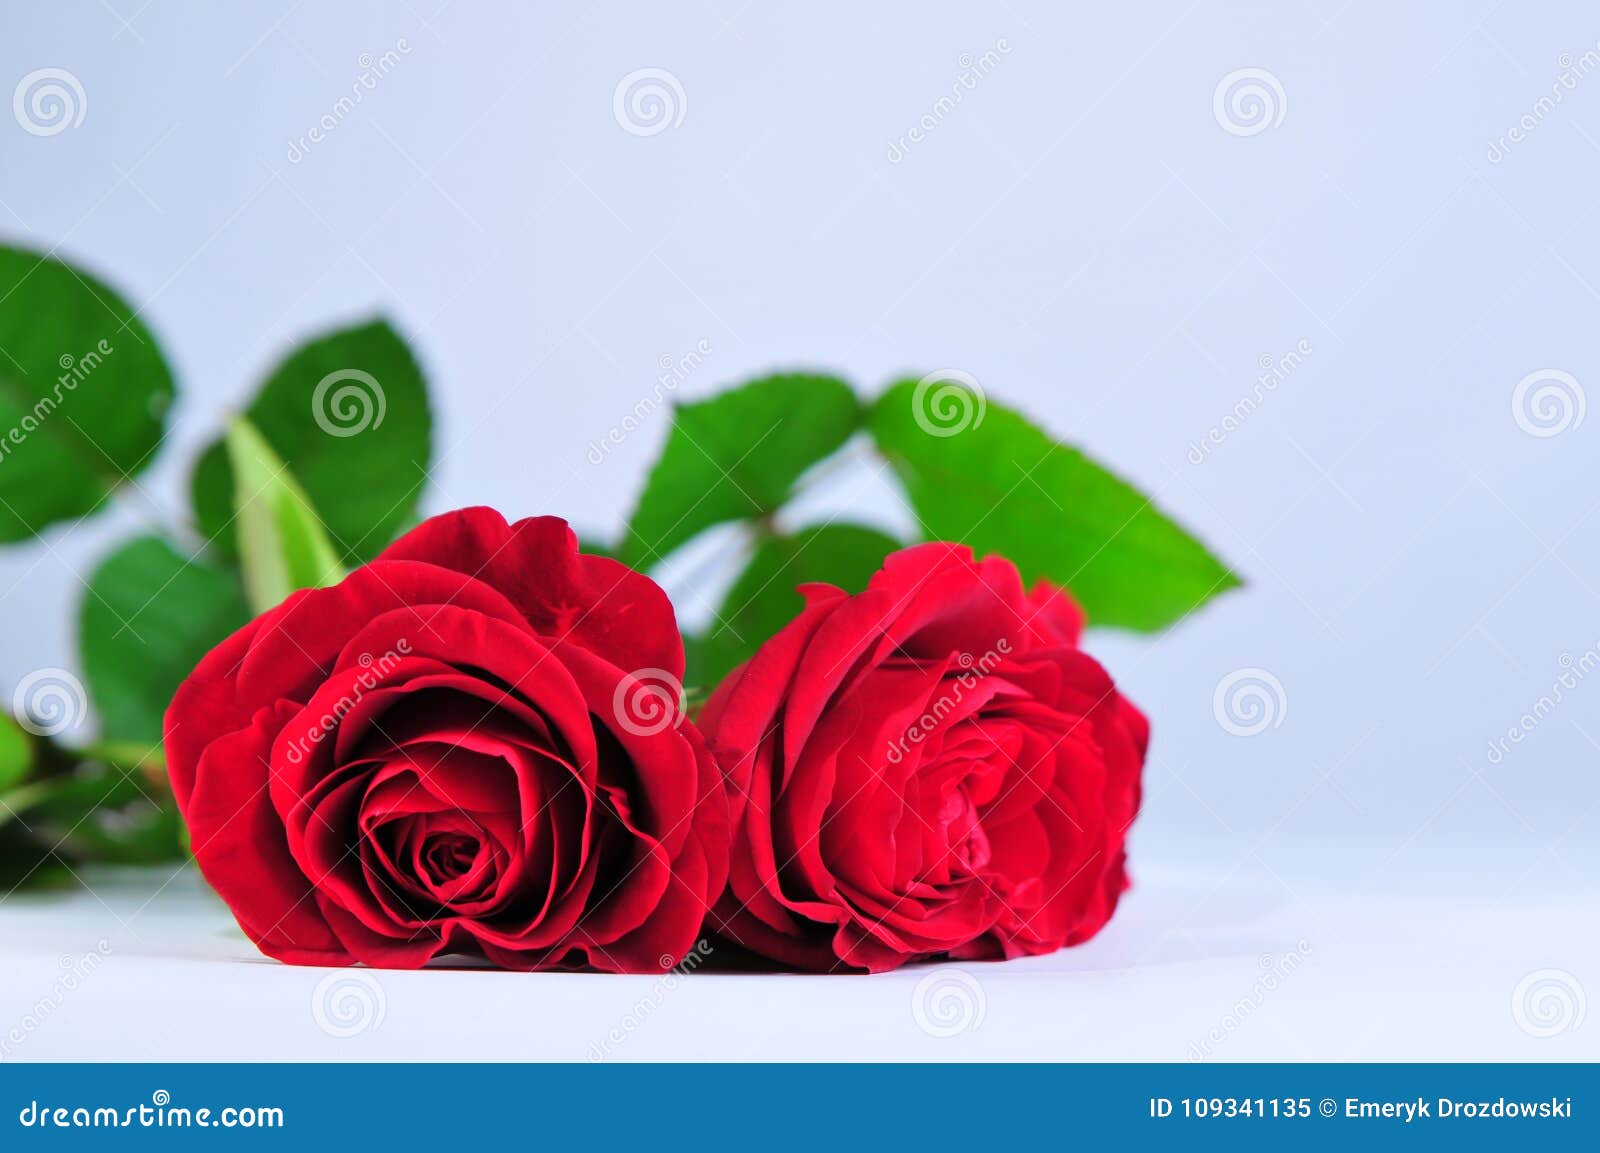 Two Roses on White Background Stock Image - Image of lights, love ...